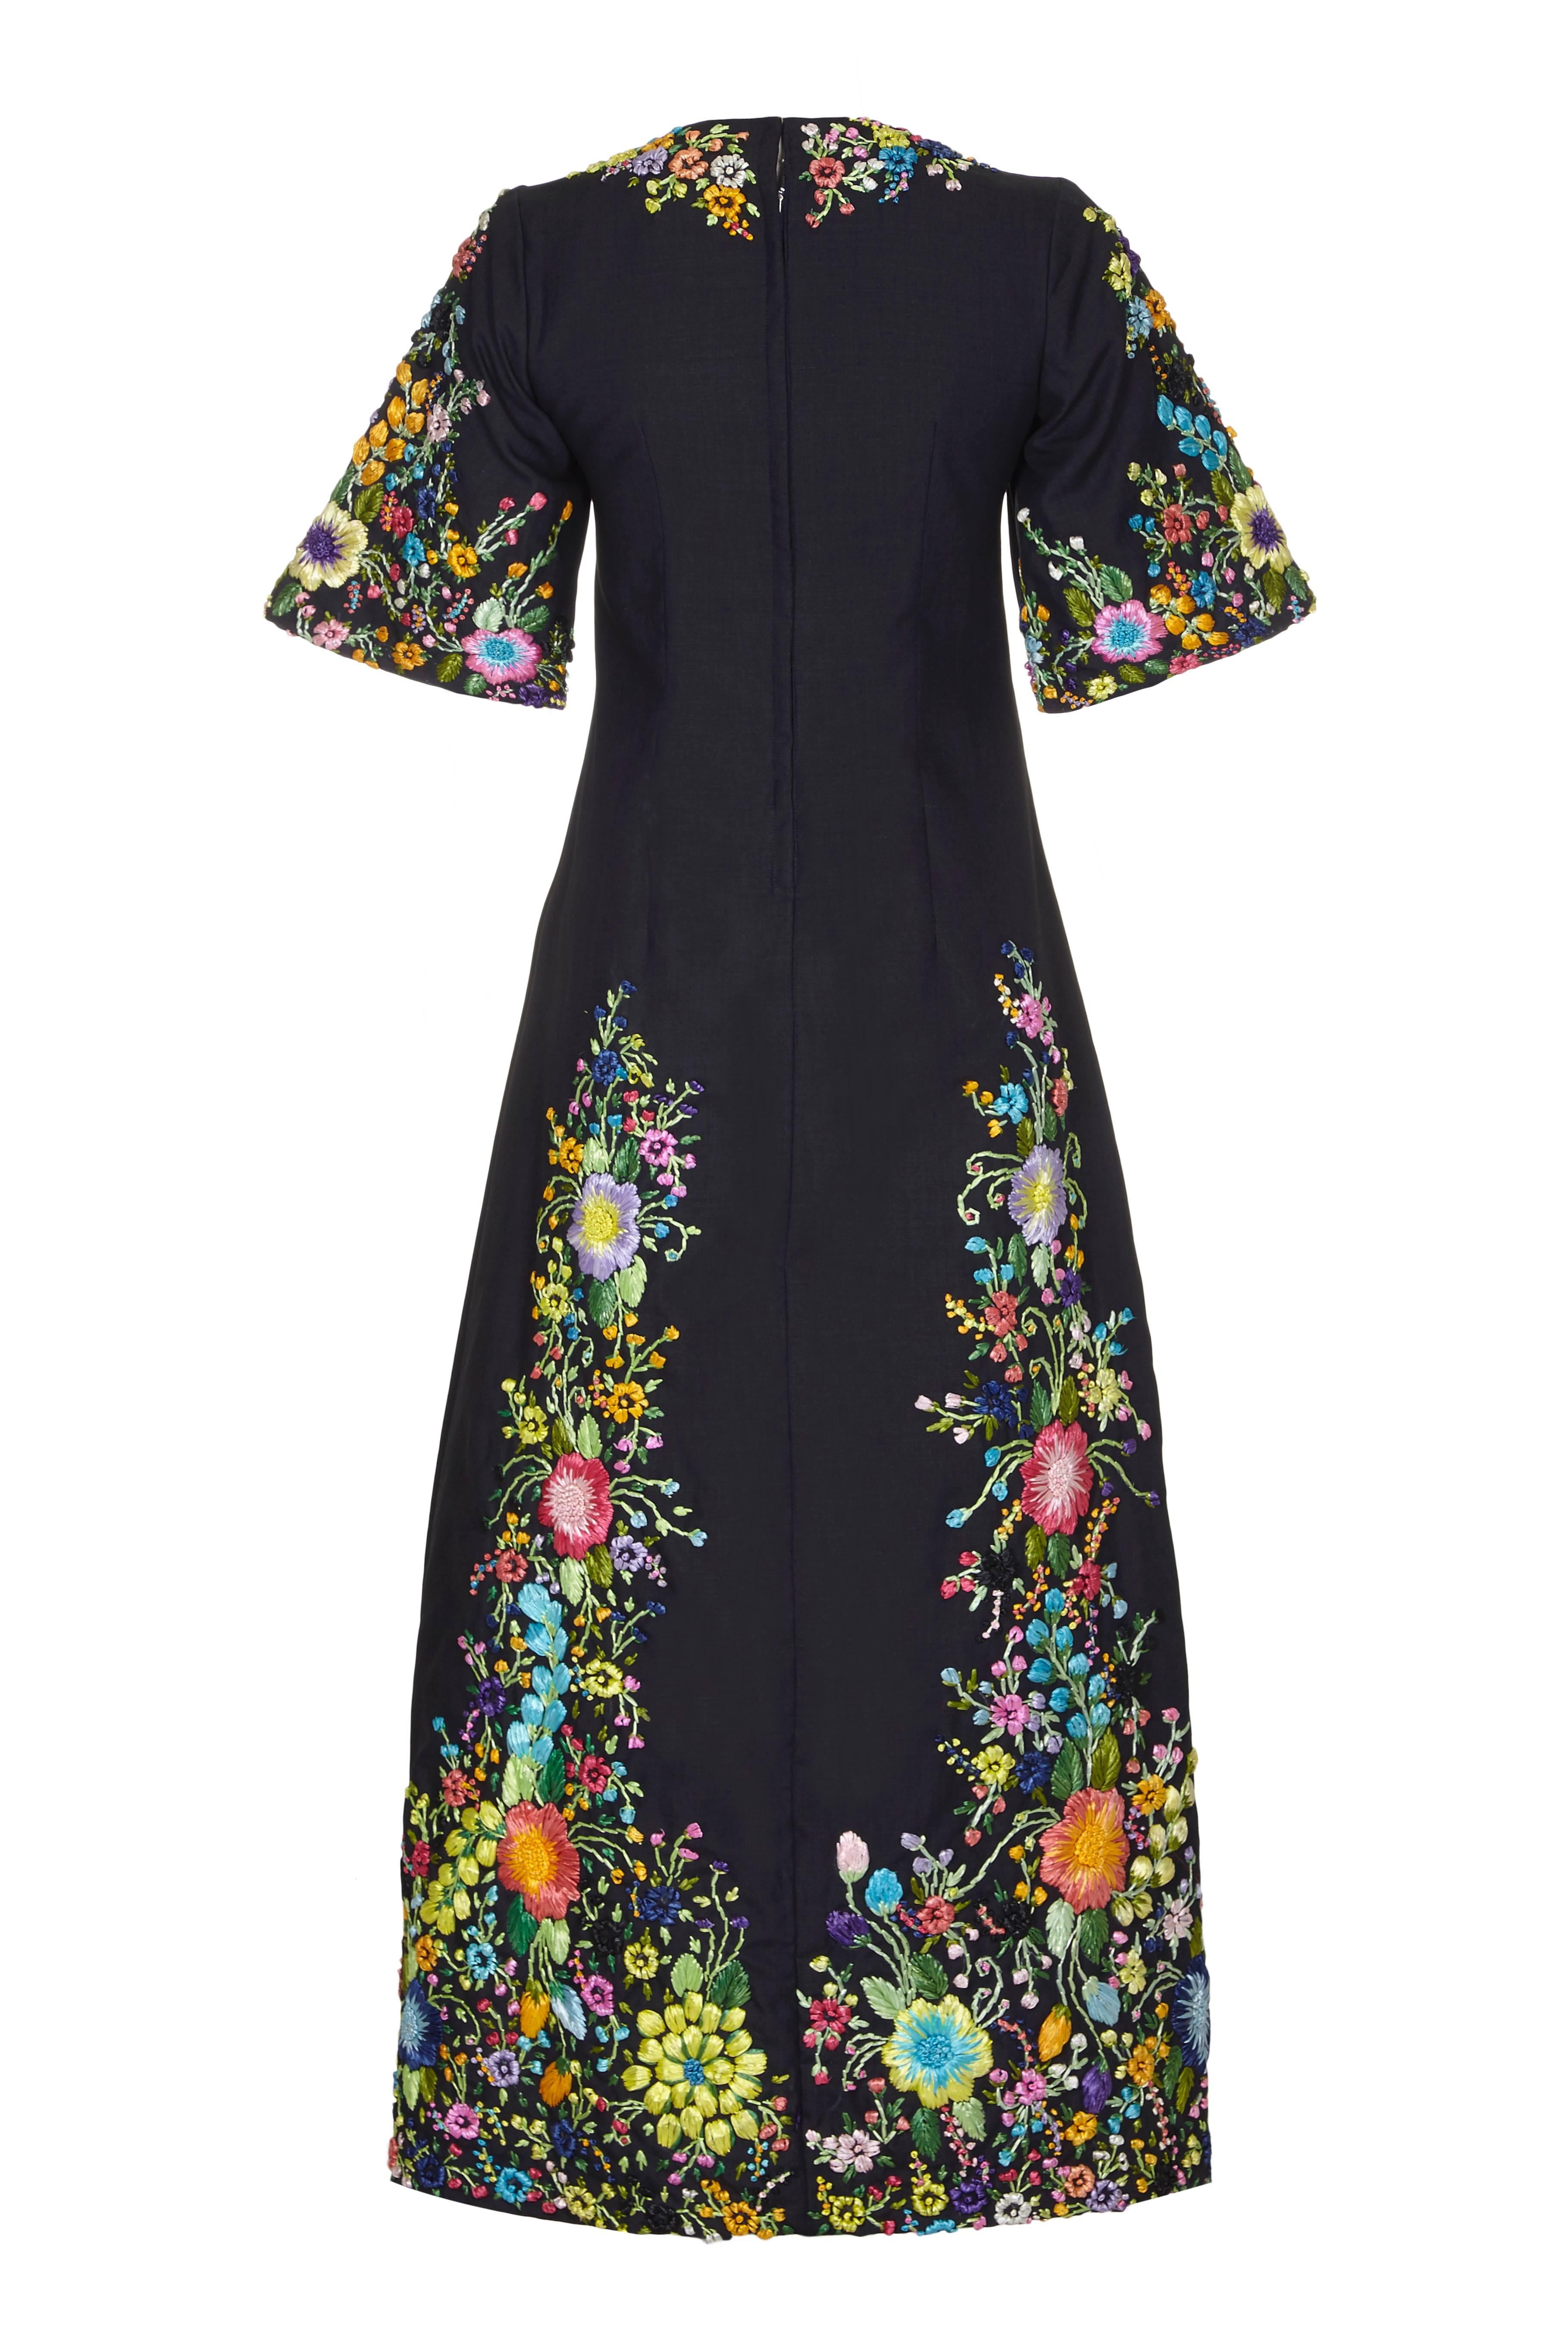 Extraordinary vintage 1960s black linen full-length dress with unbelievable multi coloured floral raffia embroidery. Featuring elbow length flared sleeves and an A-line cut skirt this dress fastens at the back with a zip and is fully lined.  An